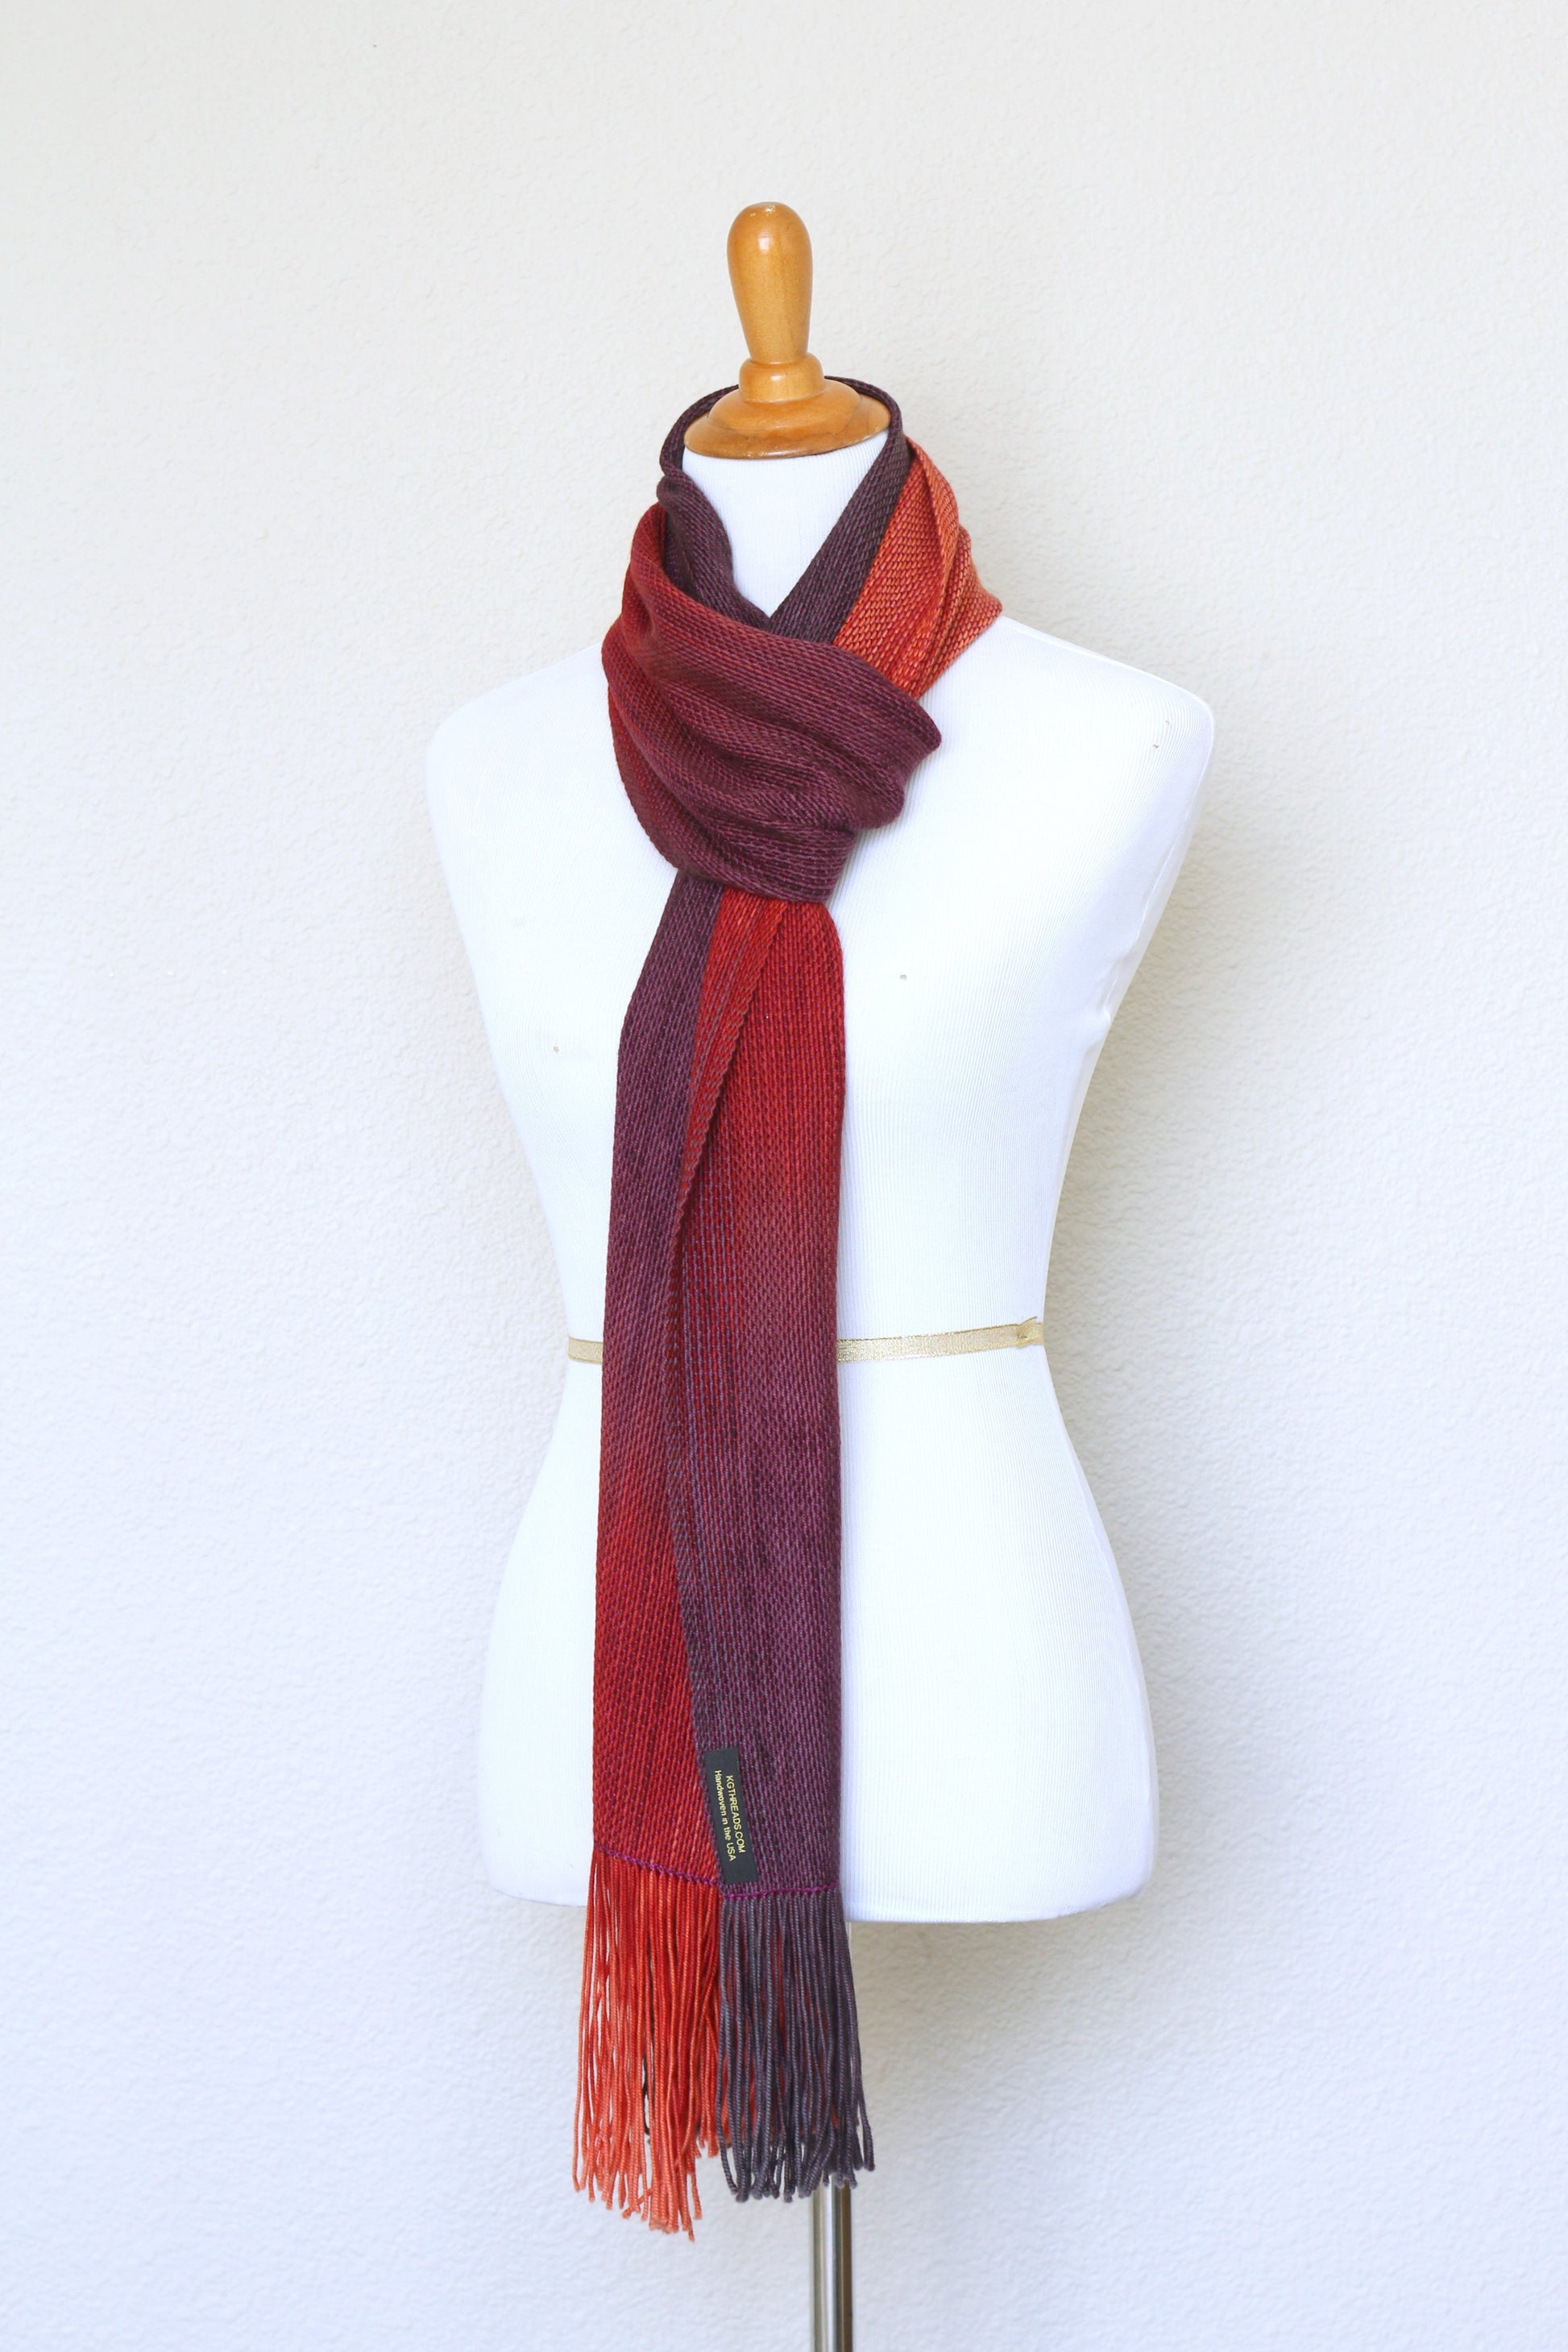 Handwoven scarf in red color